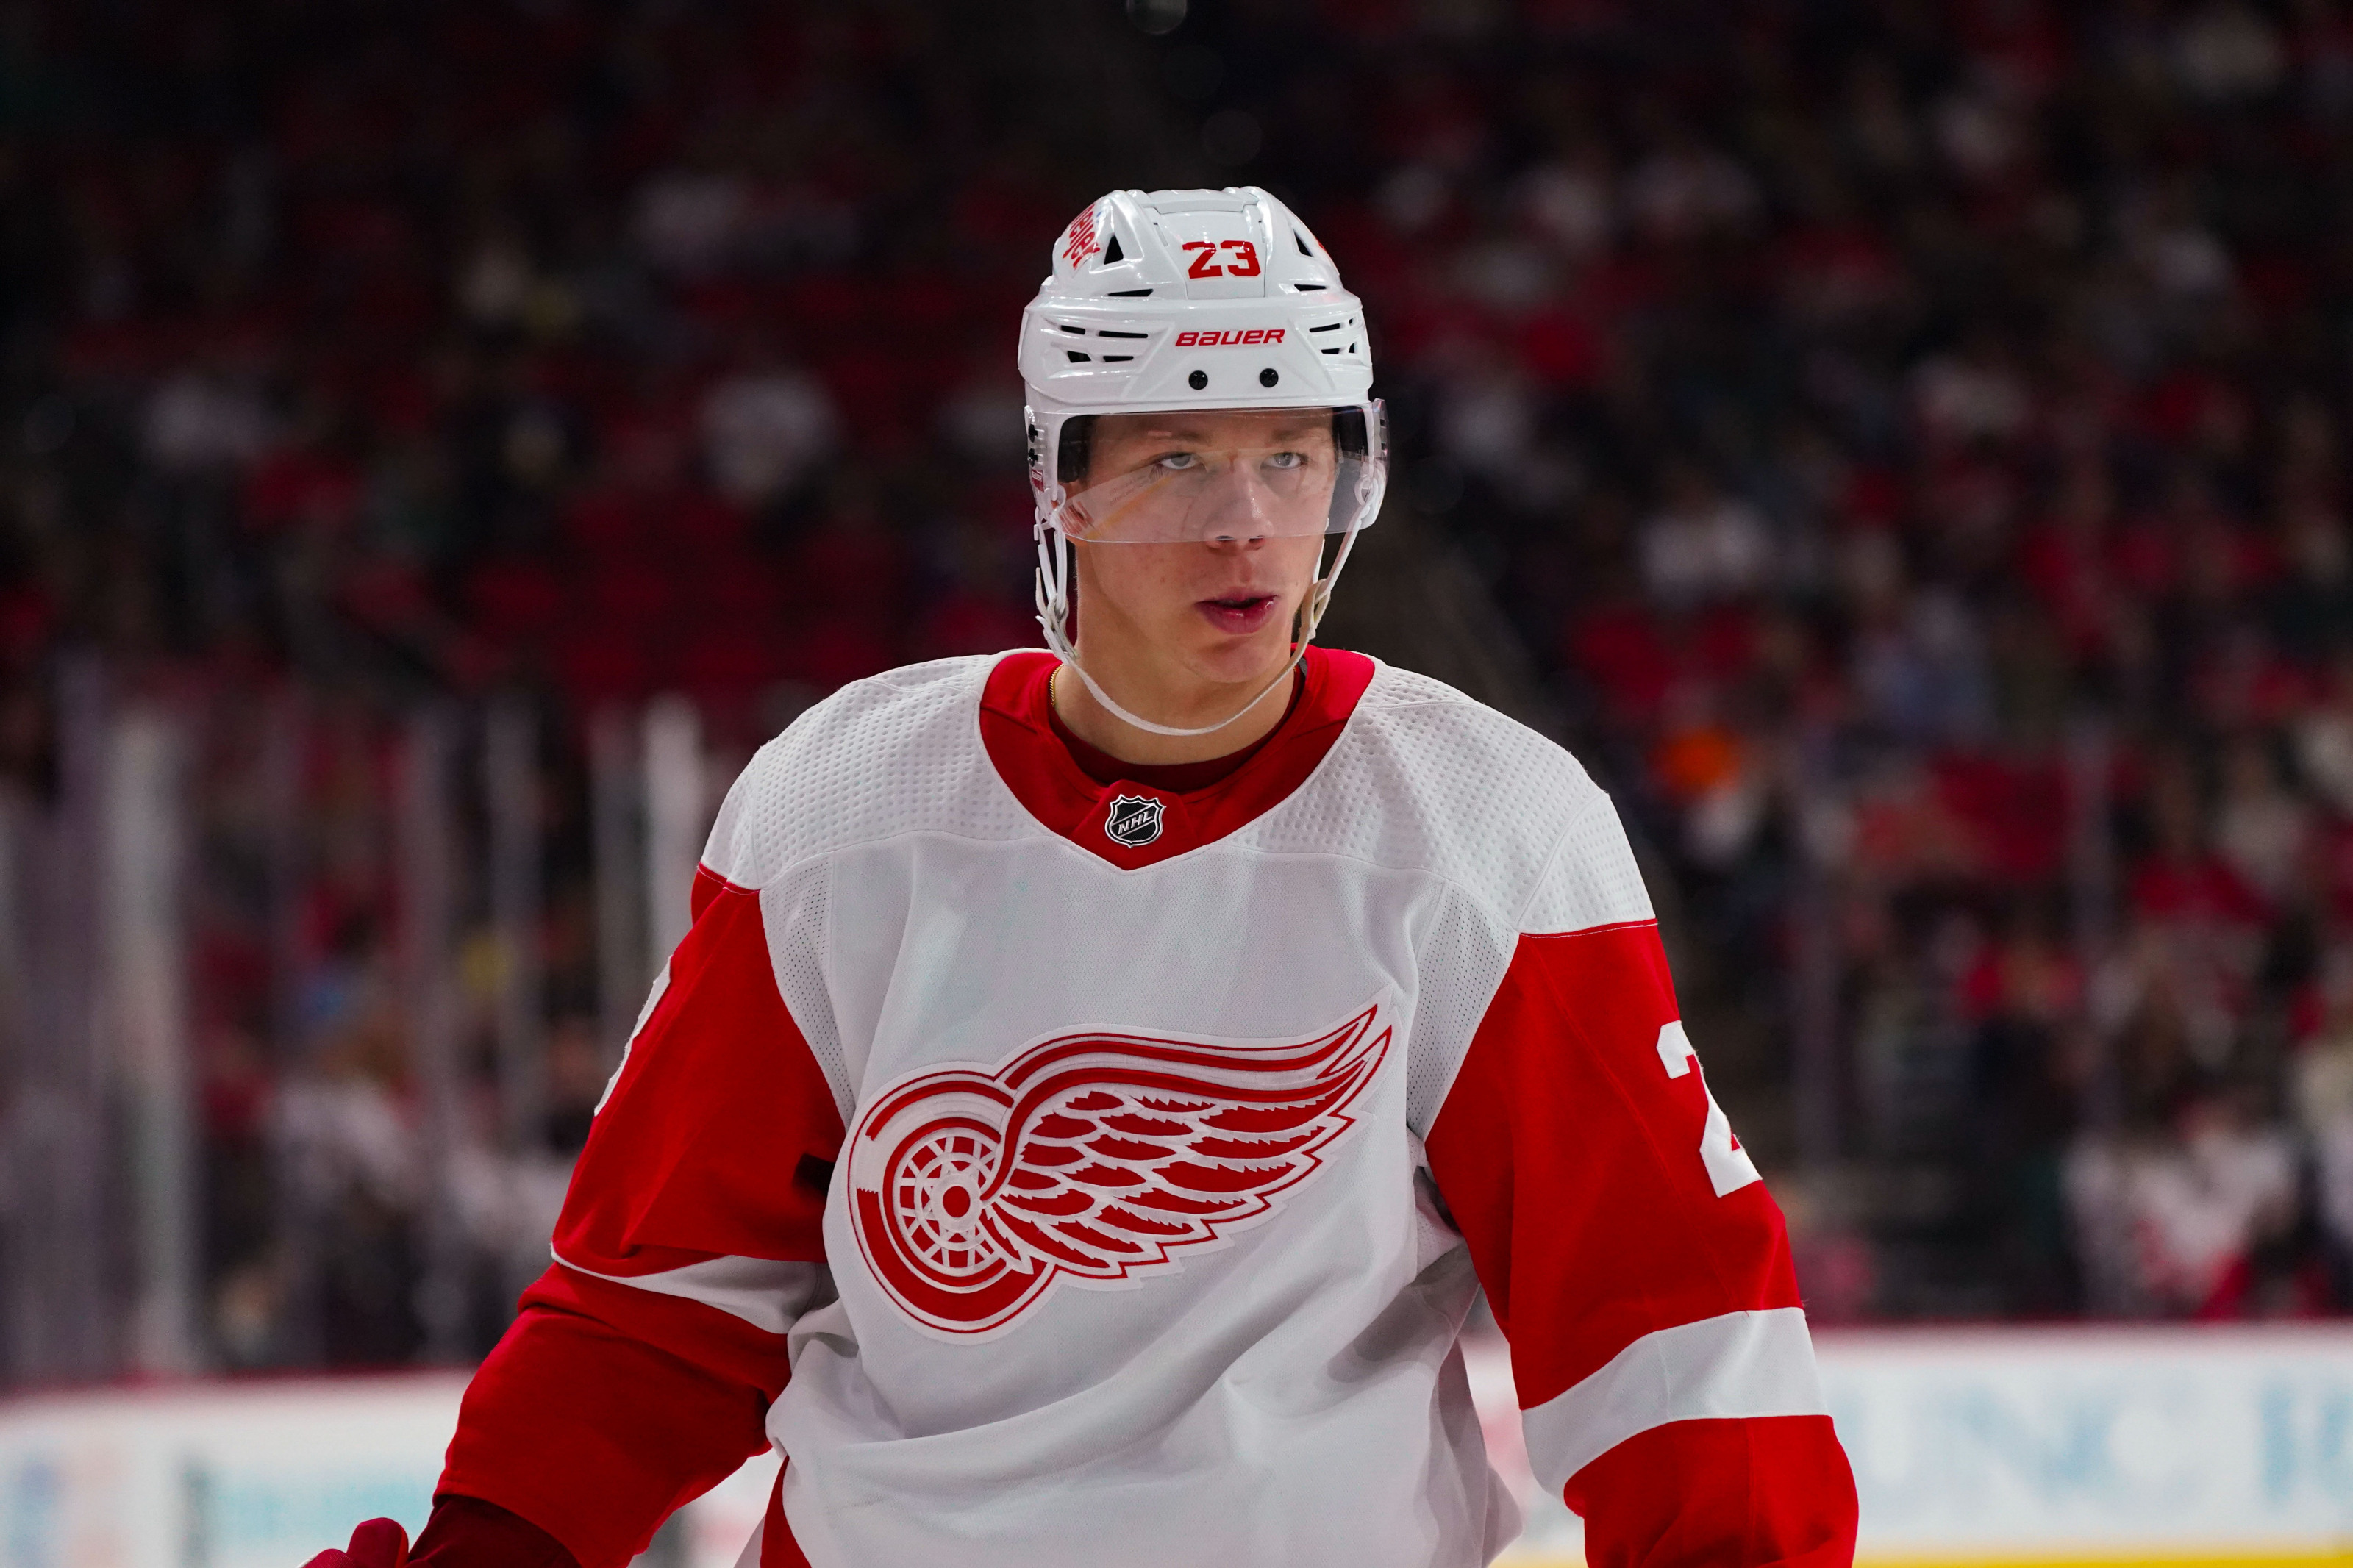 NHL - Lucas Raymond joined ELITE Detroit Red Wings company with last  night's hat trick. 🔴